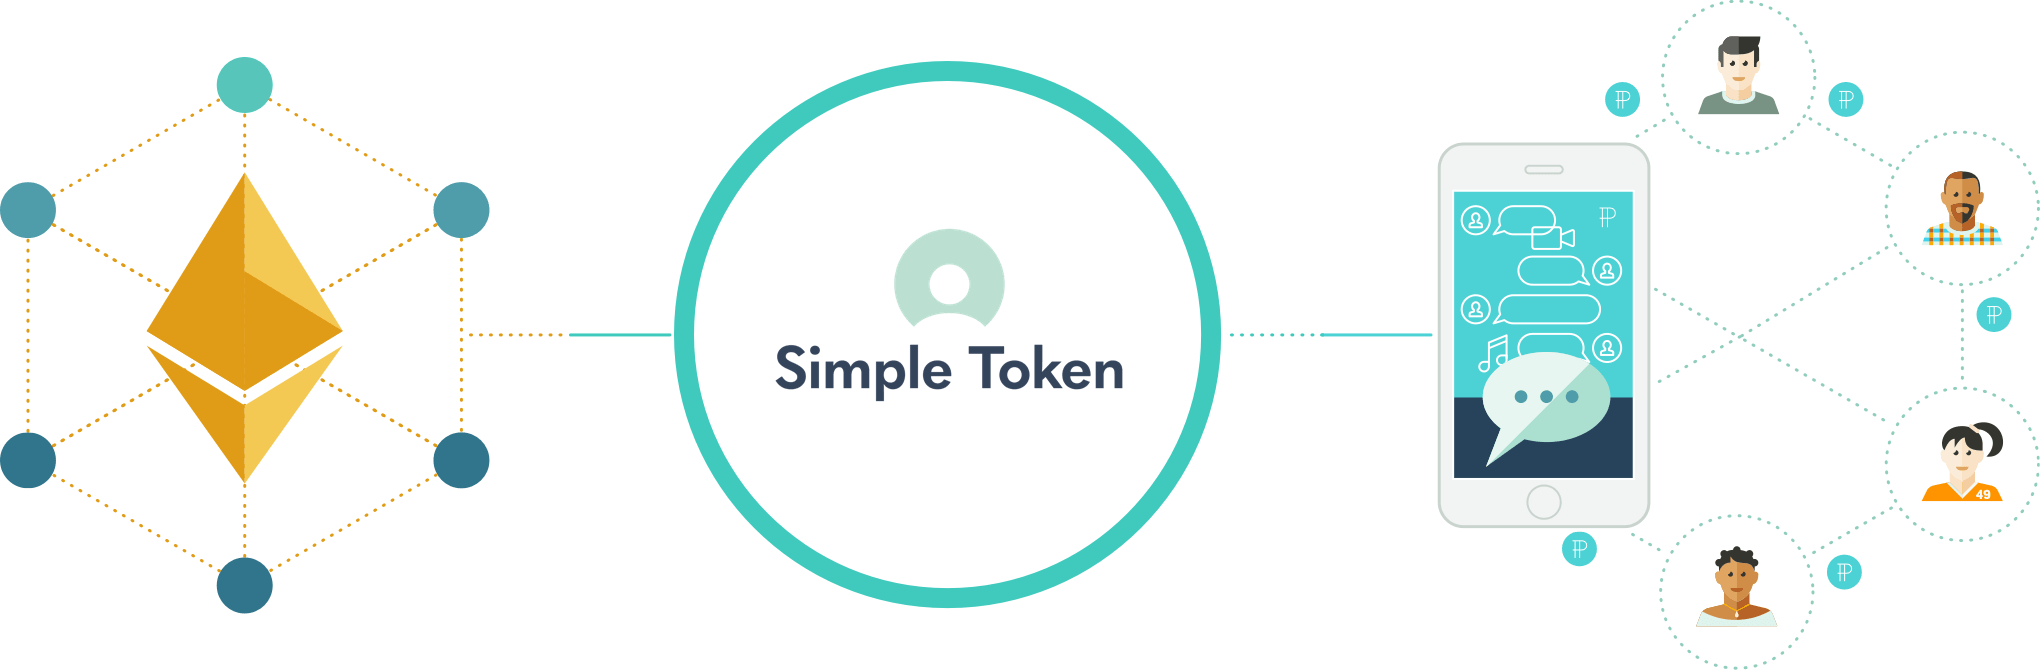 simple-token-architecture-stage2-2x.png